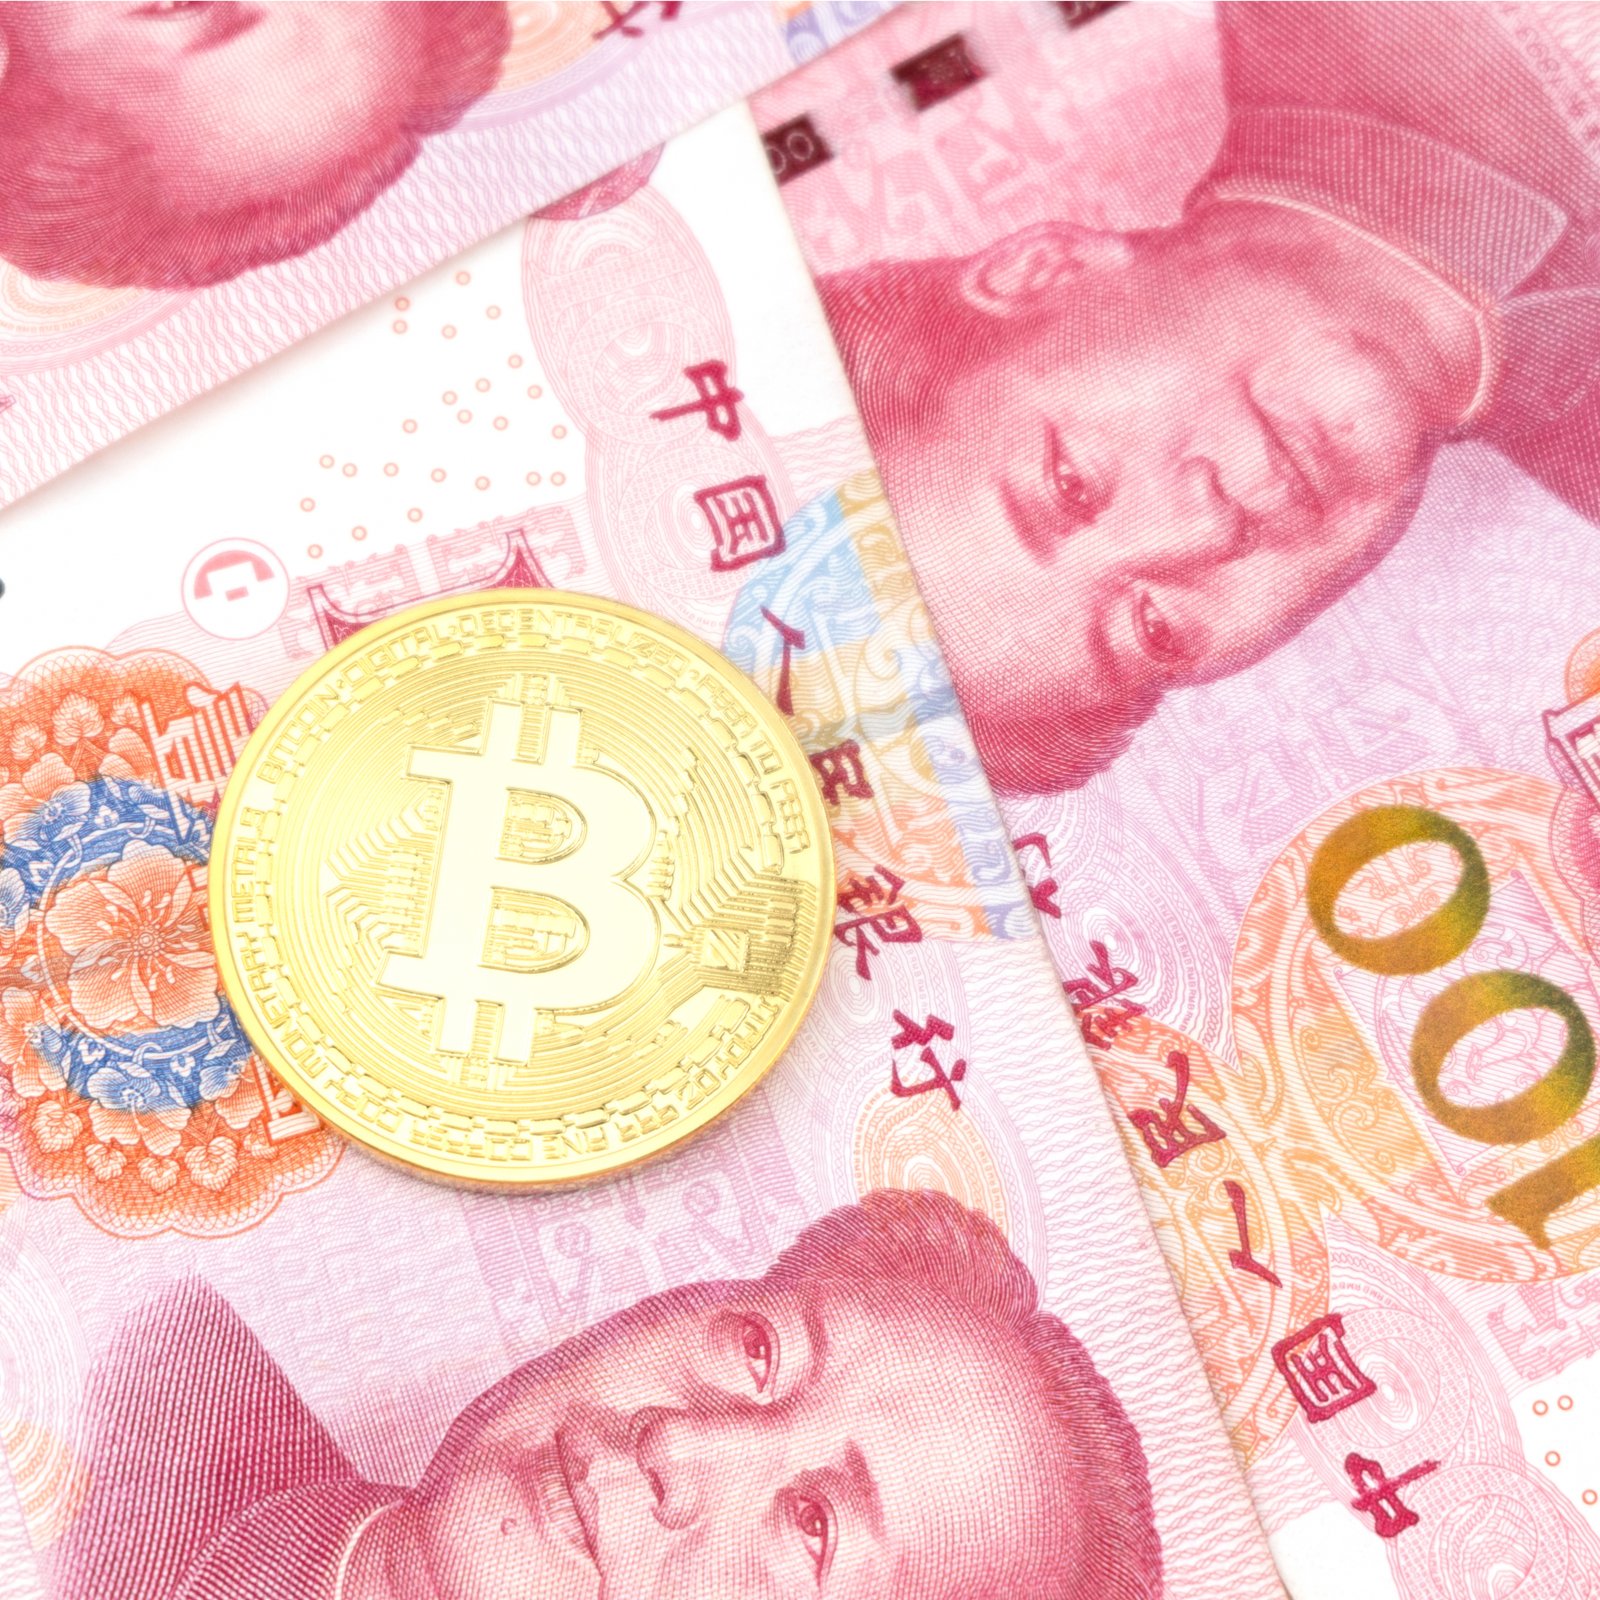 Bitcoin in Brief Wednesday: China Fights Impersonators and Fraudsters